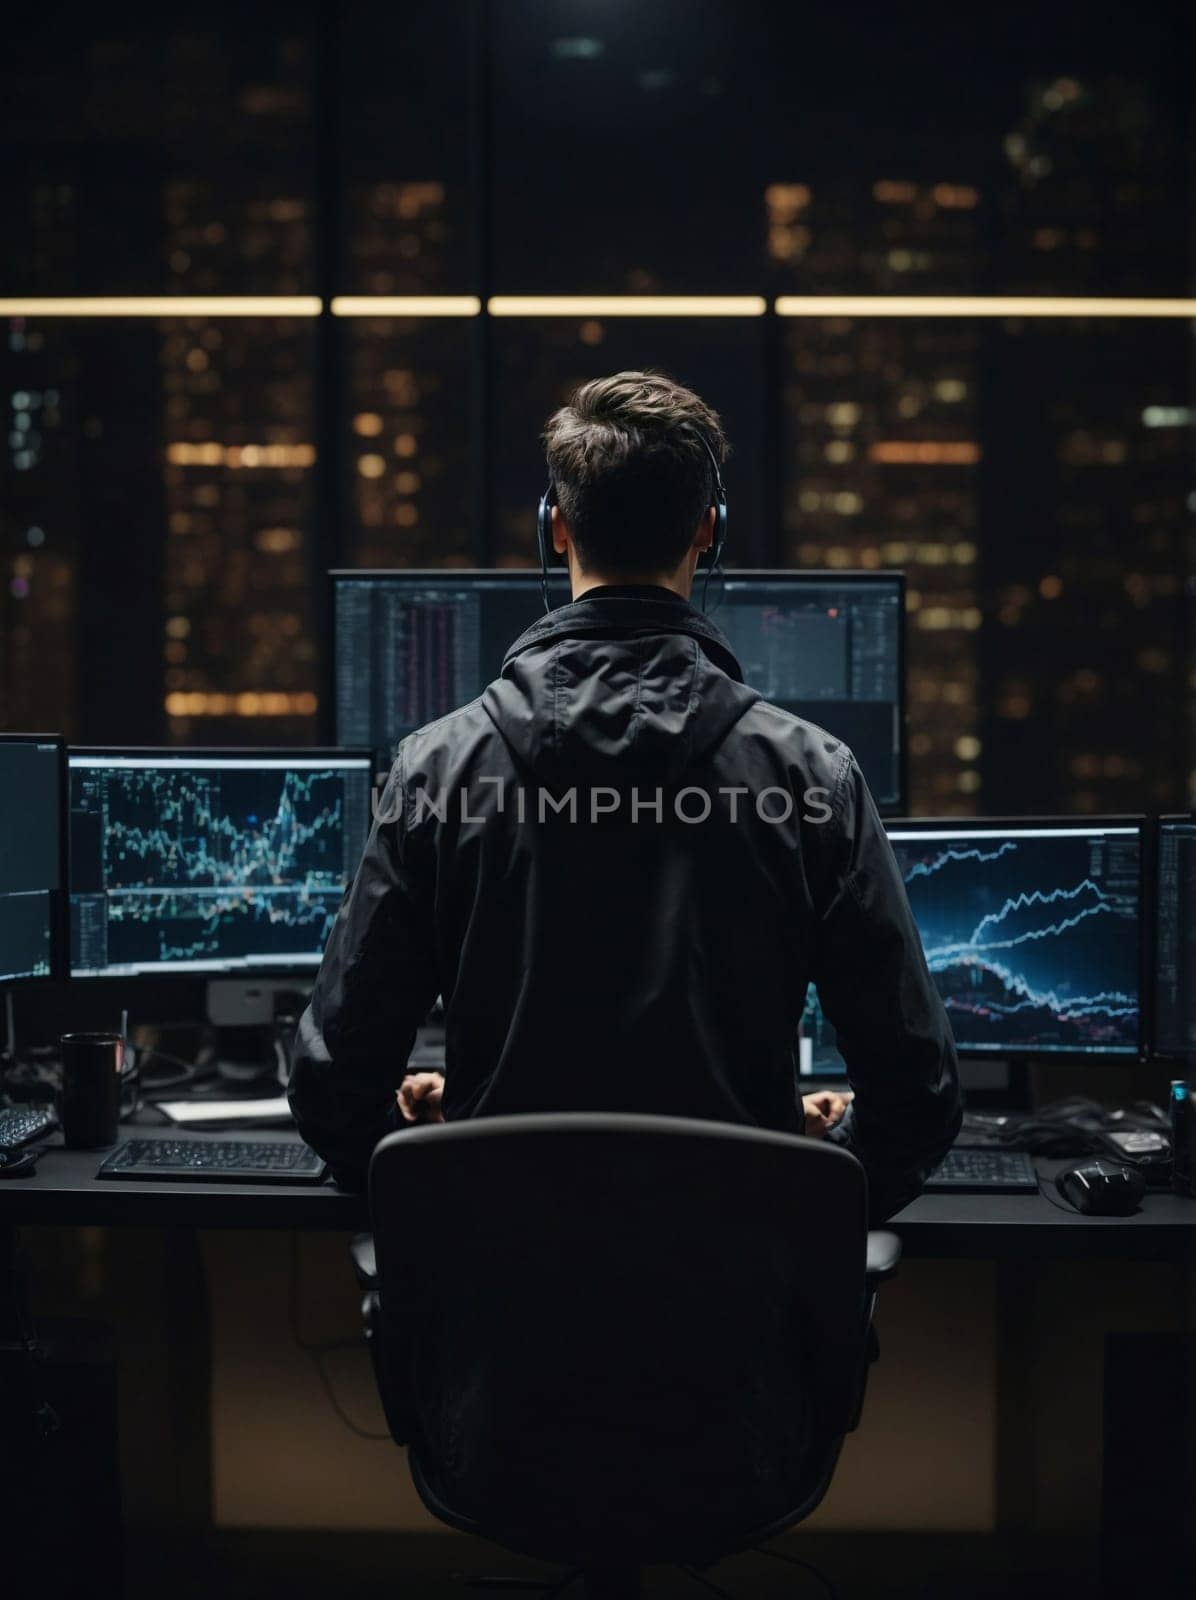 A man is seen sitting at a desk with three computer monitors in front of him.